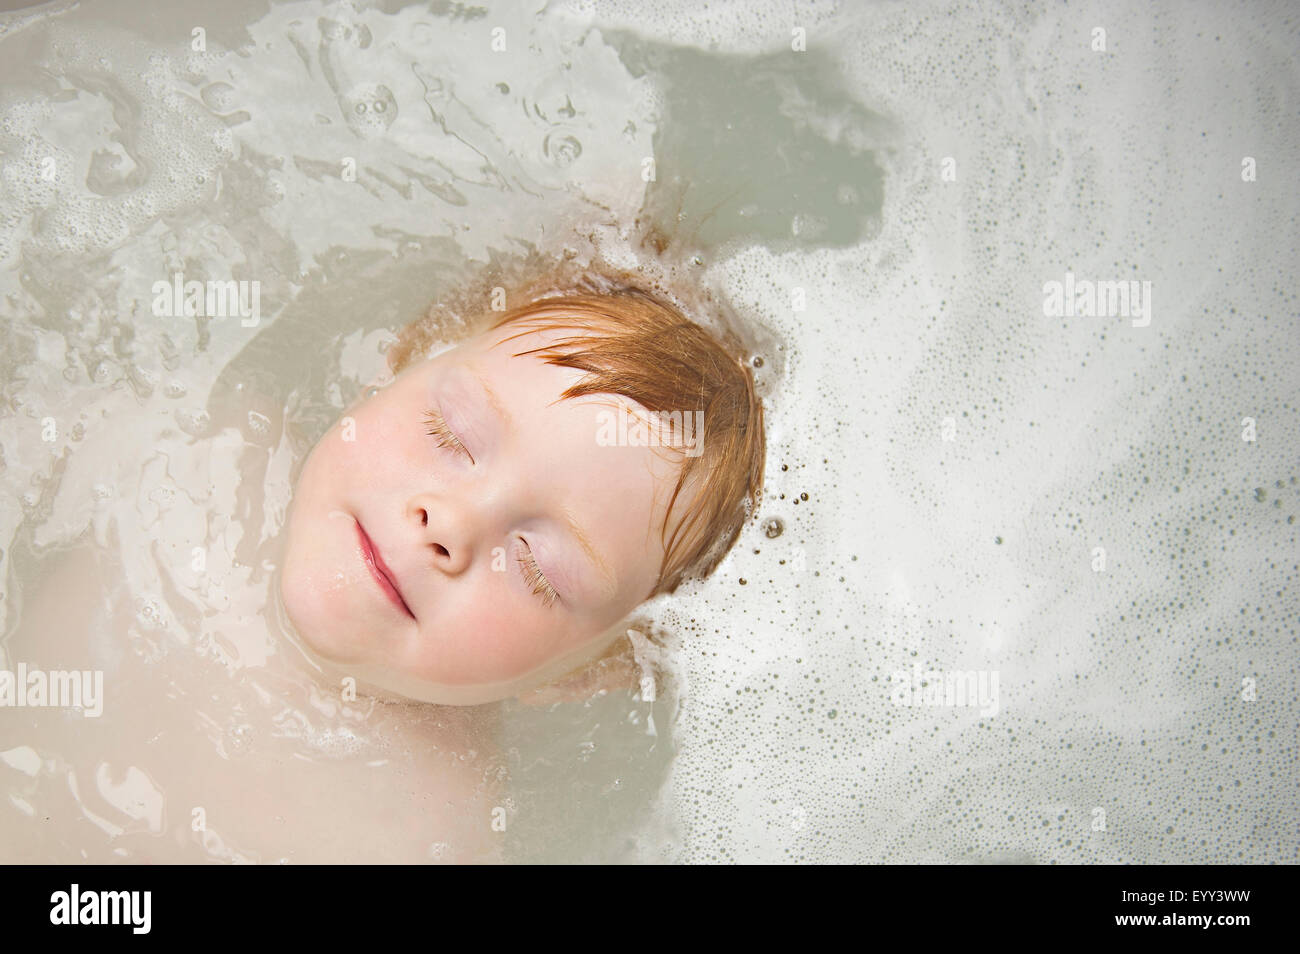 Woman with eyes closed in bubble bath Banque D'Images